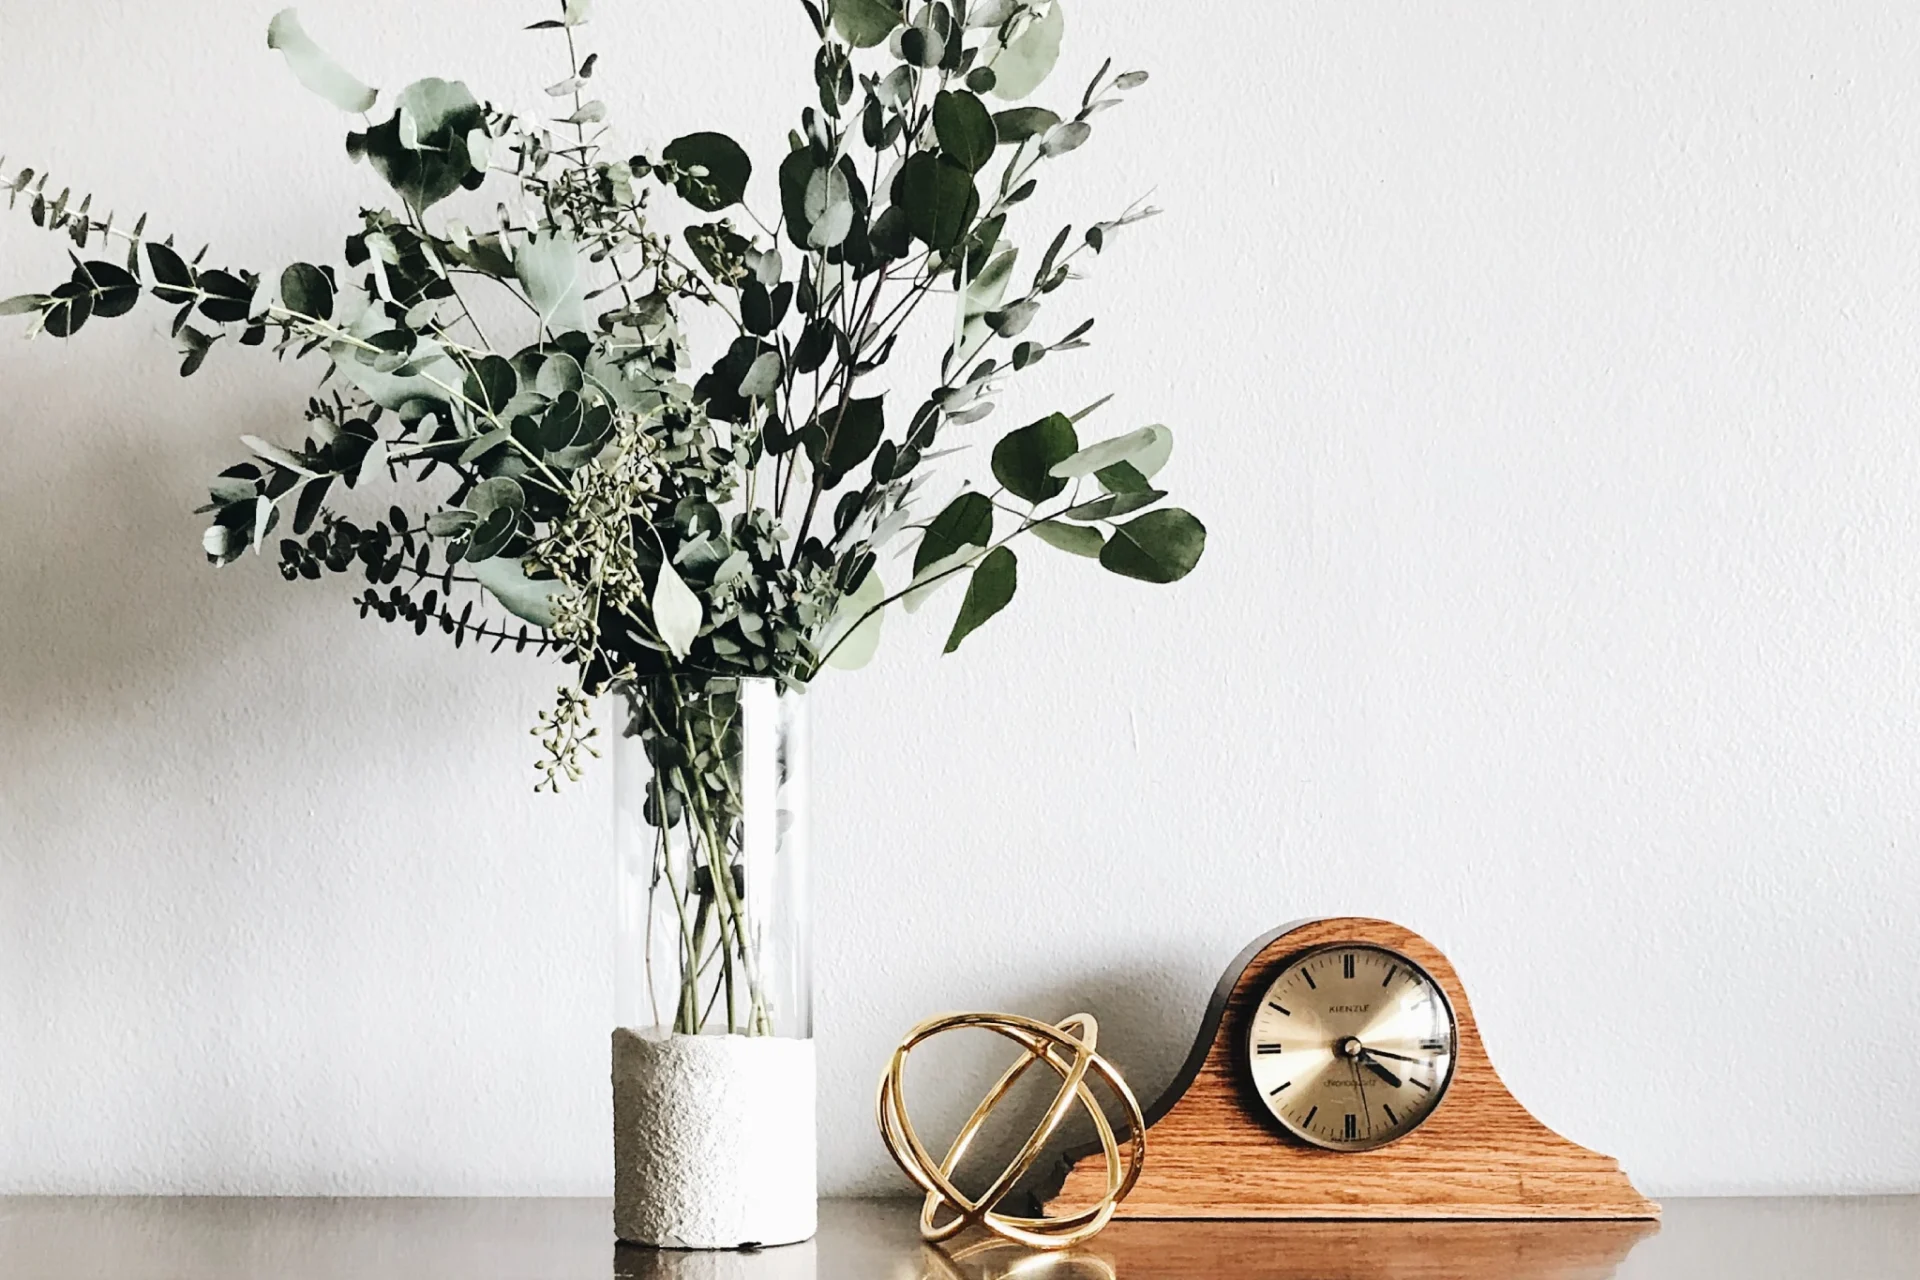 A vase with flowers in it next to a clock.